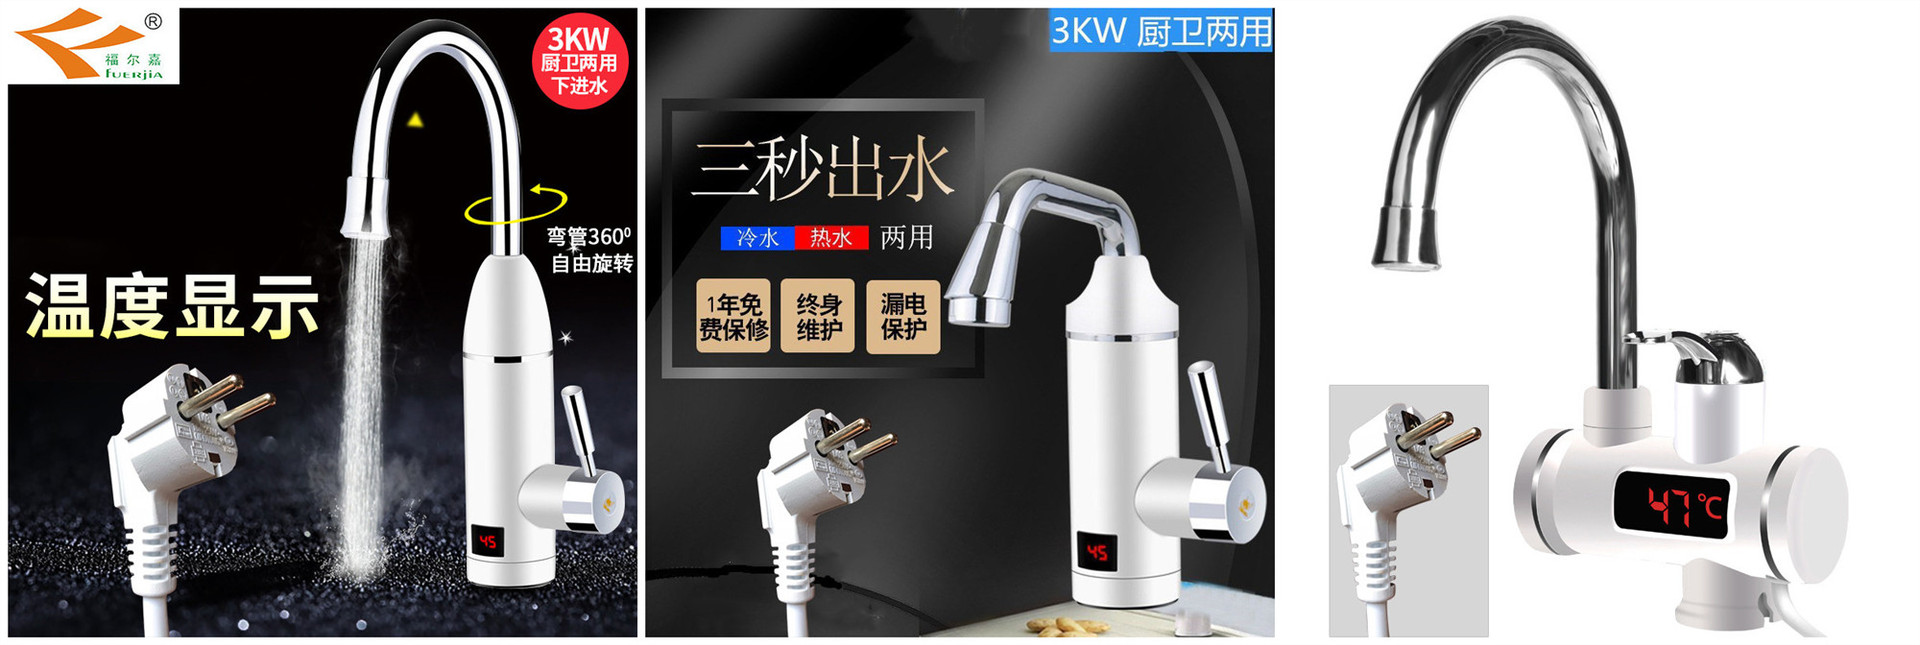 Household Electric Heating Faucet Is Hot Kitchen Bathroom Fast Heating Three Seconds Fast Hot Water Faucet Foreign Trade